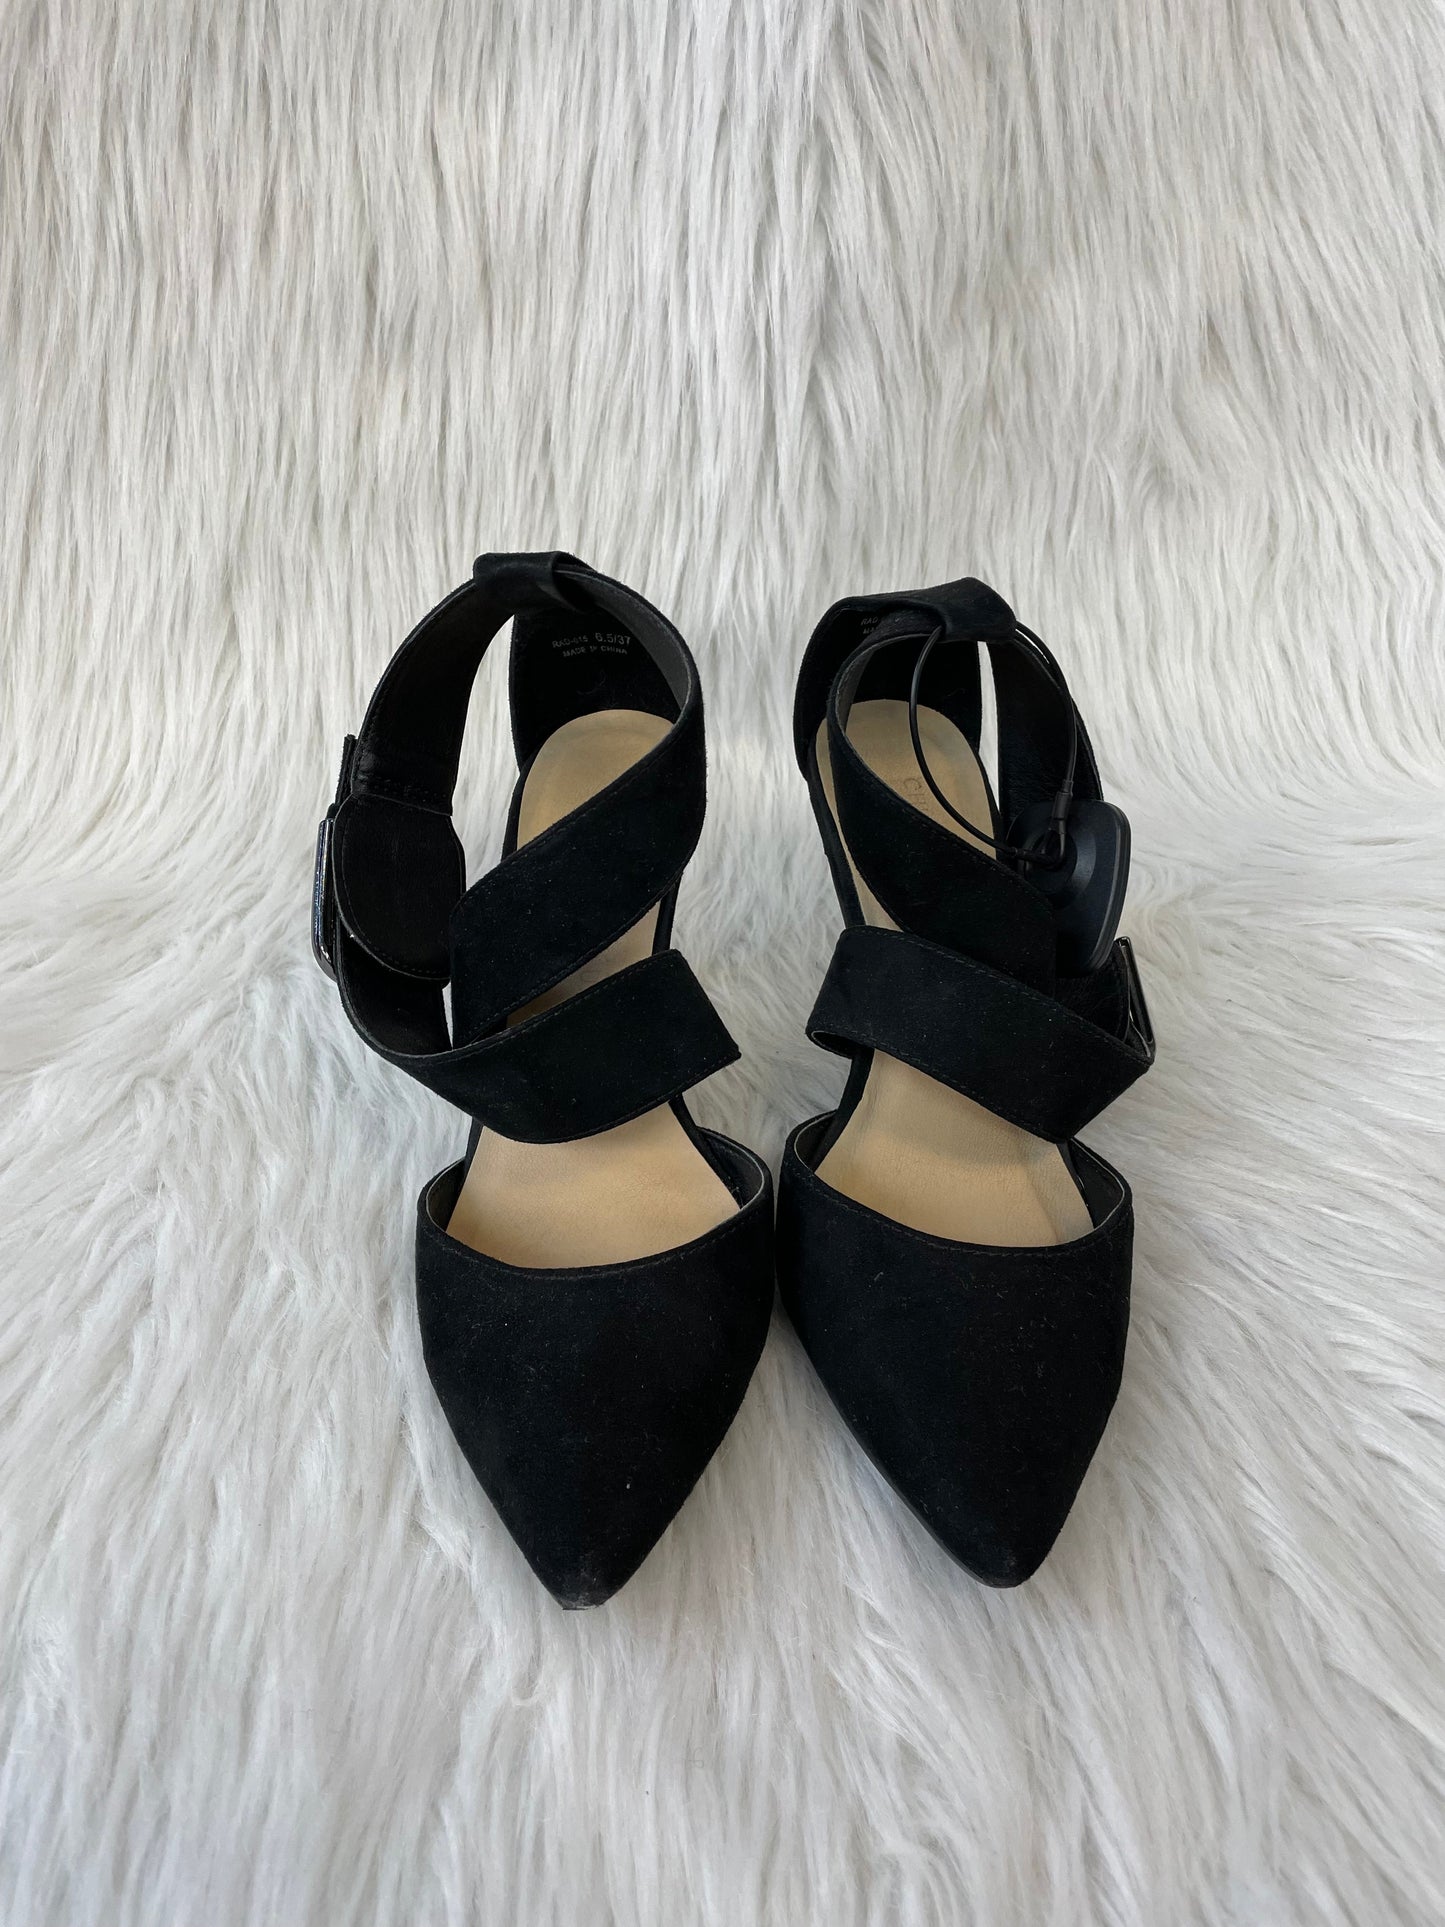 Black Shoes Heels Kitten Chinese Laundry, Size 6.5